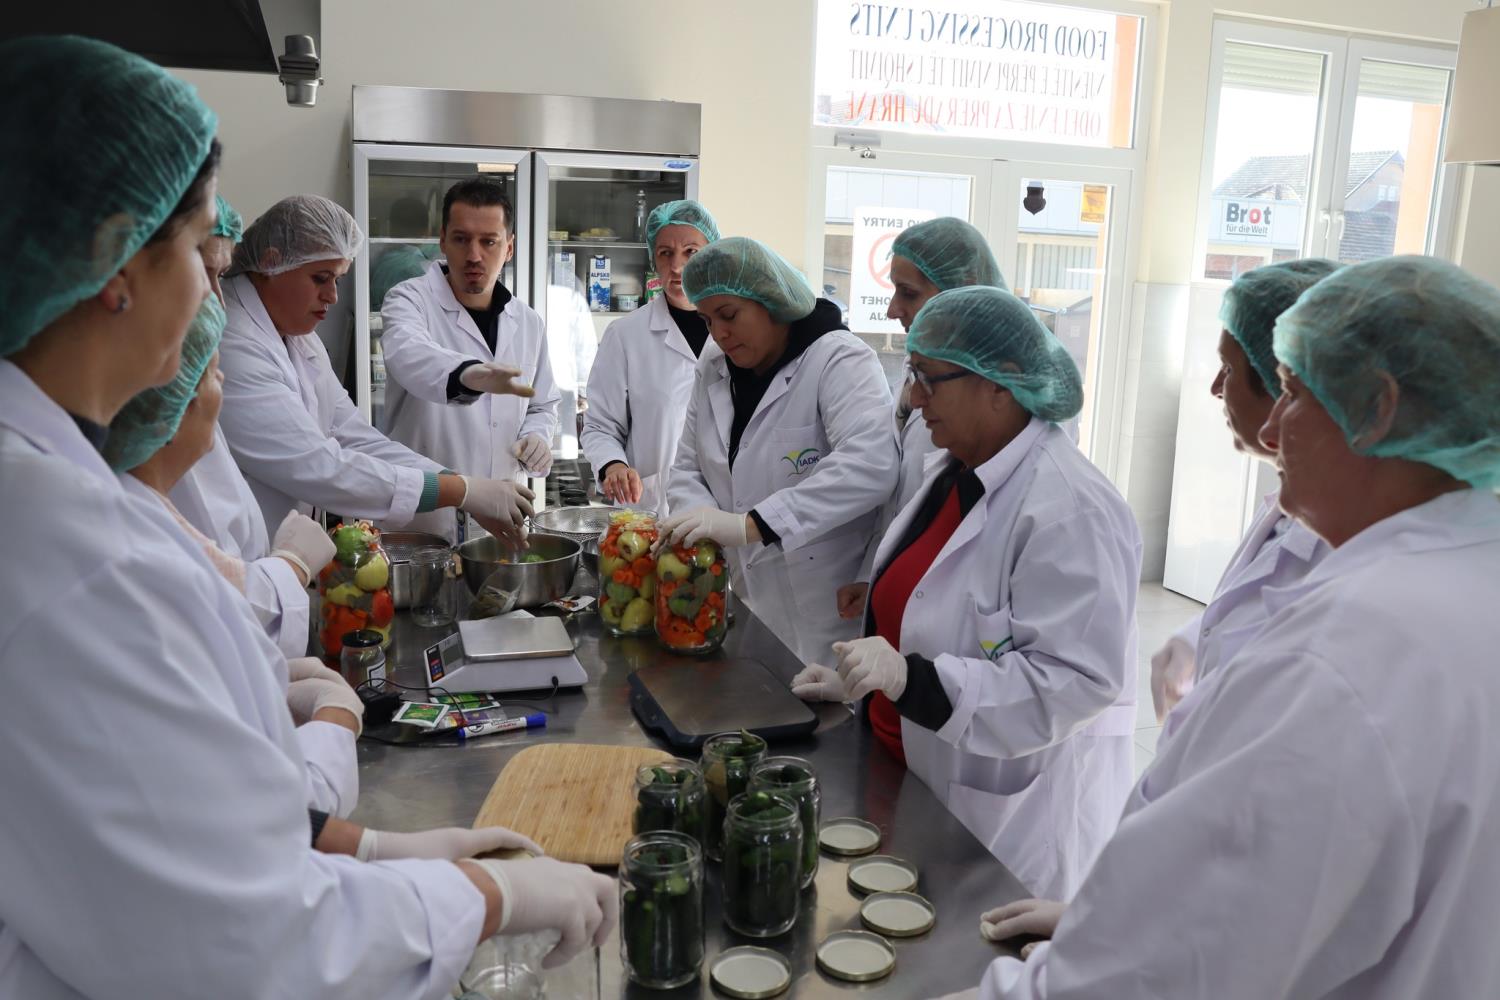 The trainings for the group of women in the field of food processing were carried out, in particular for the module of preservation of fruits, vegetables and similar